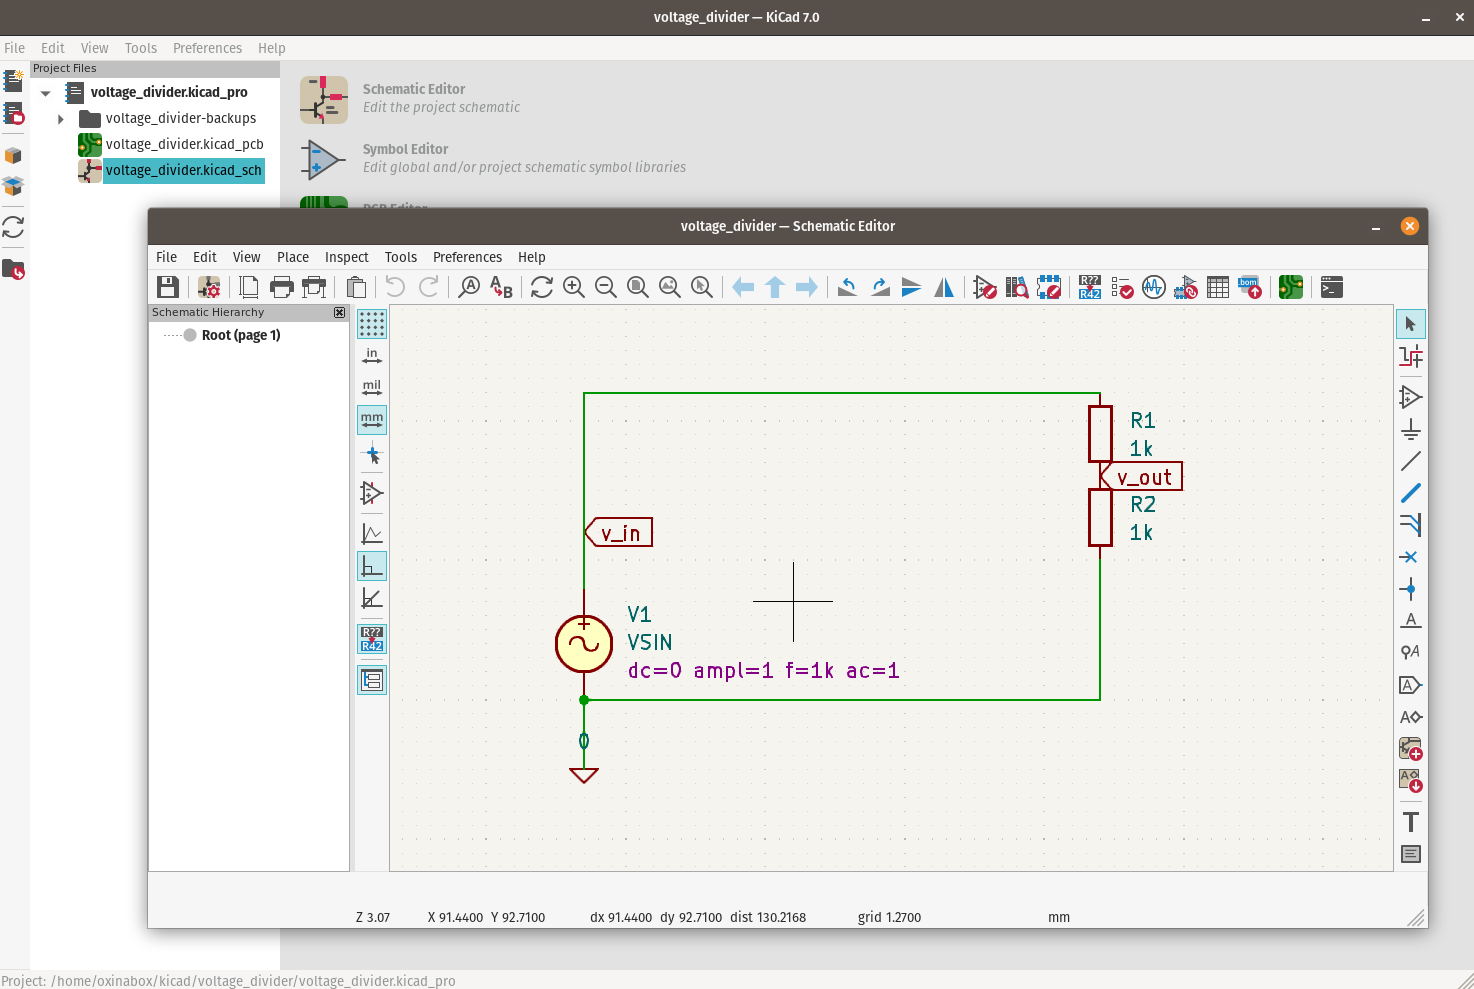 Screenshot of schematic for a voltage divider displayed in the KiCAD editor